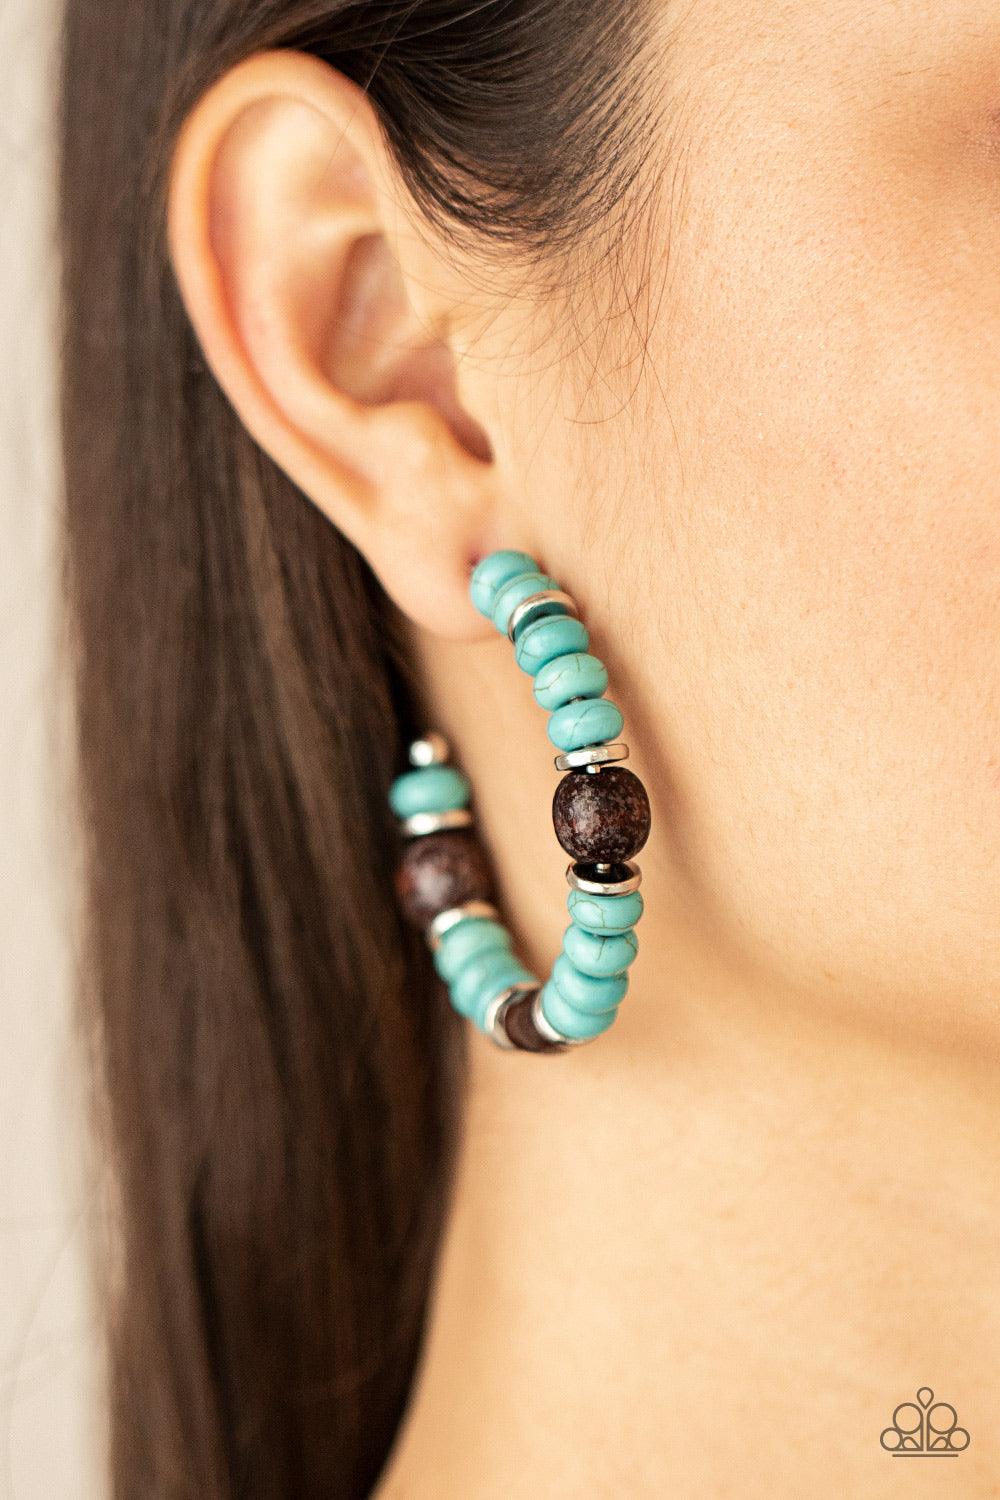 Paparazzi Accessories Definitely Down-To-Earth - Blue An earthy collection of turquoise stone beads, silver discs, and brown wooden beads are delicately threaded along a dainty wire, creating an artisan inspired hoop. Earring attaches to a standard post f